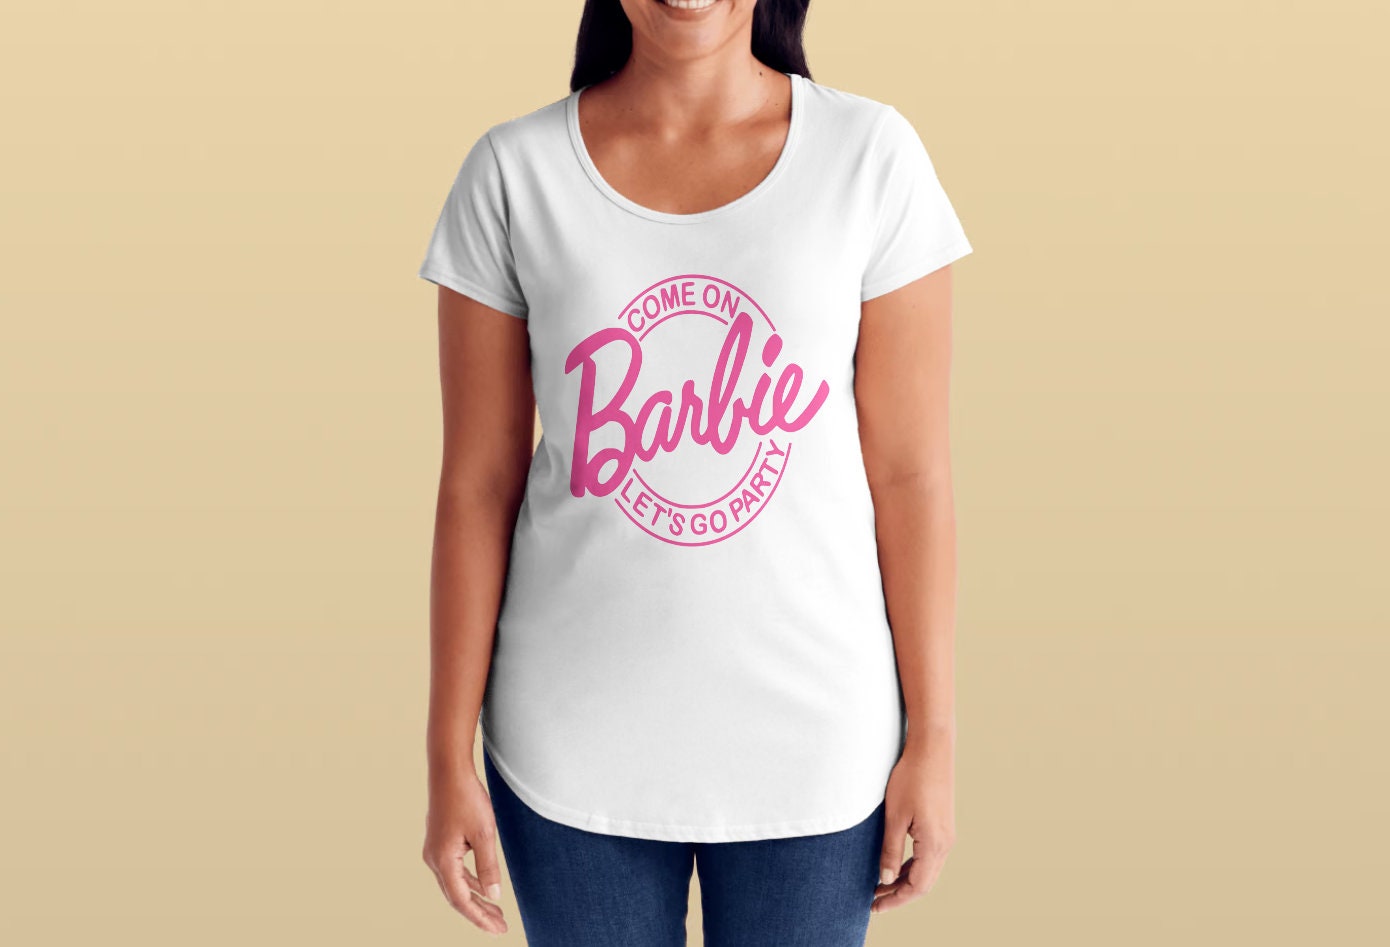 Baby Doll Pink LV Style Graphic Shirt, Let's Go Party Barbie Tee - Bring  Your Ideas, Thoughts And Imaginations Into Reality Today